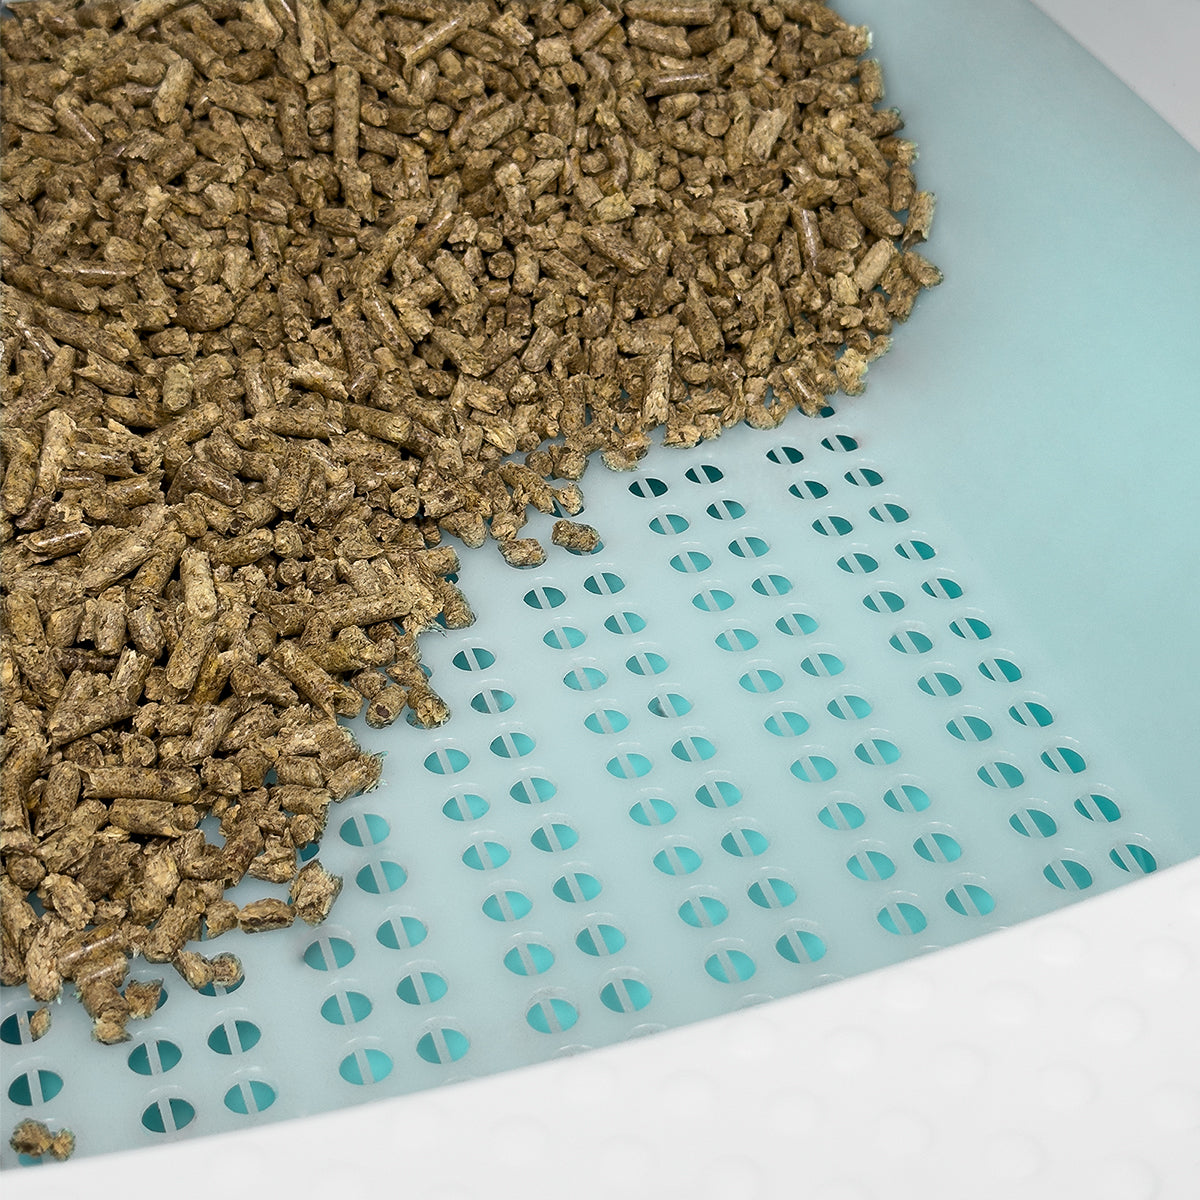 Pine Pellet Litter Box - Close up with pine pellets on one side of the litter box - Turquoise